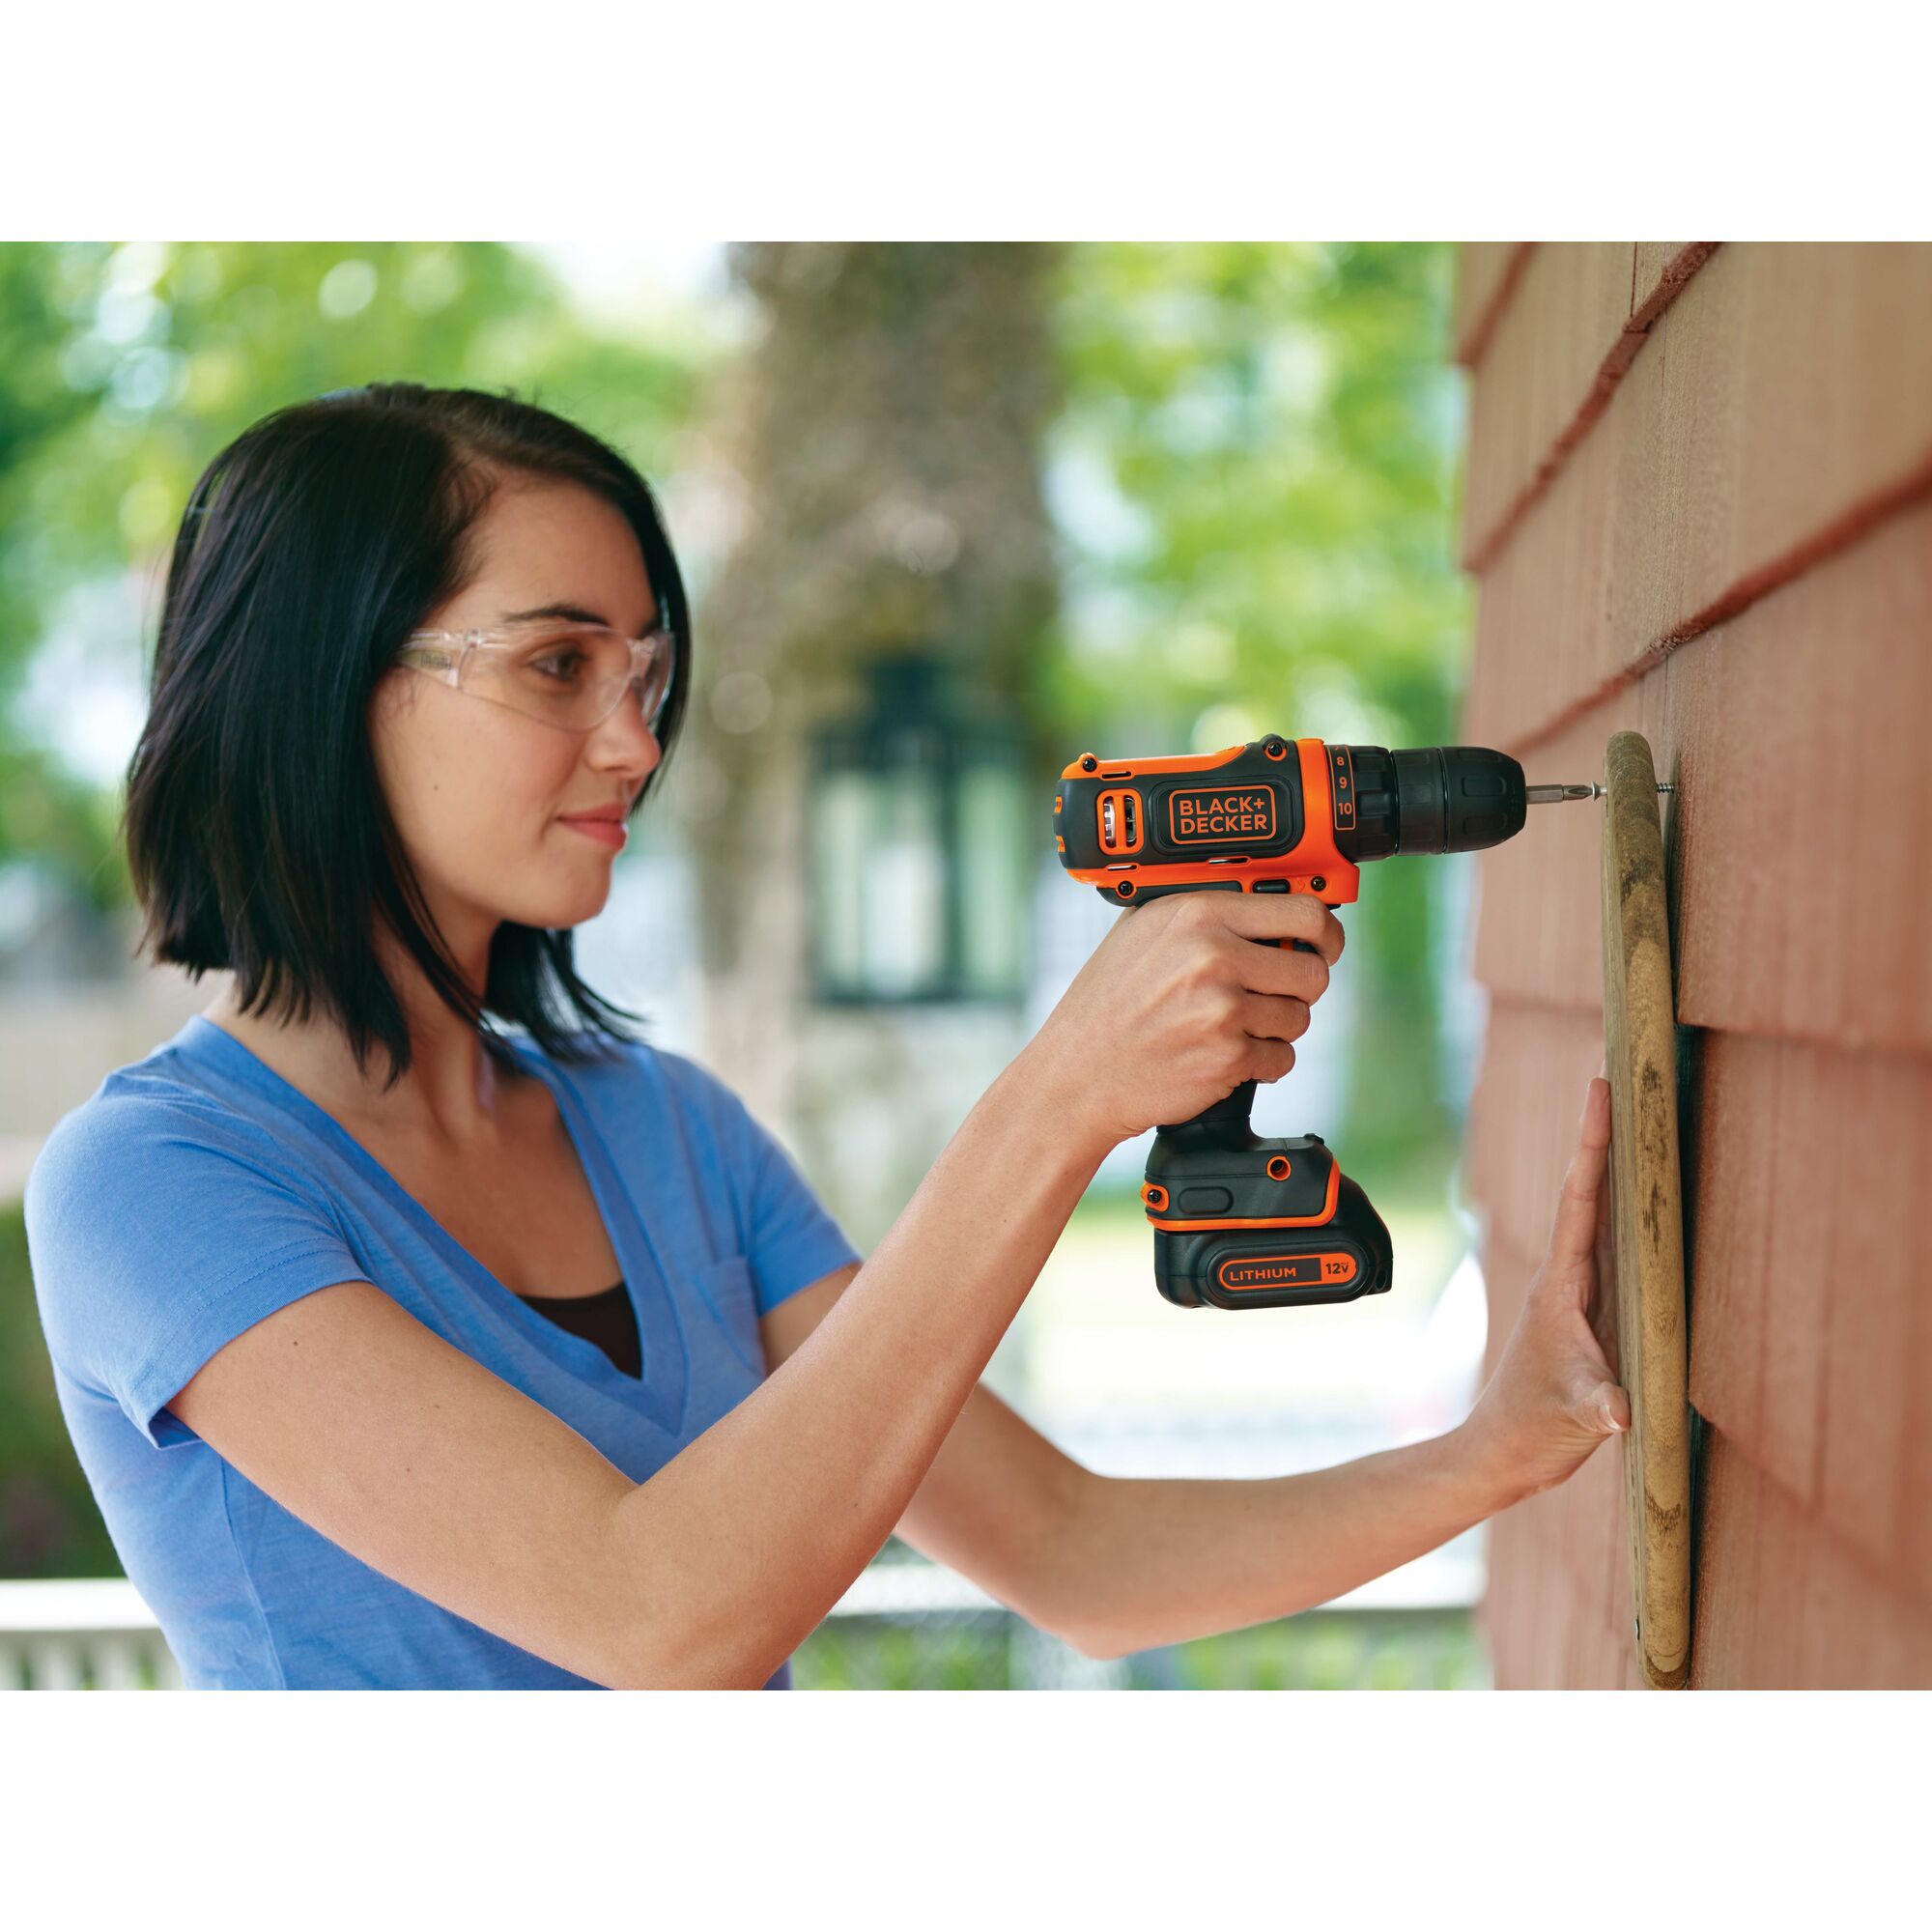 12 volt MAX cordless lithium drill driver being used by a person to drill a hole through wood.